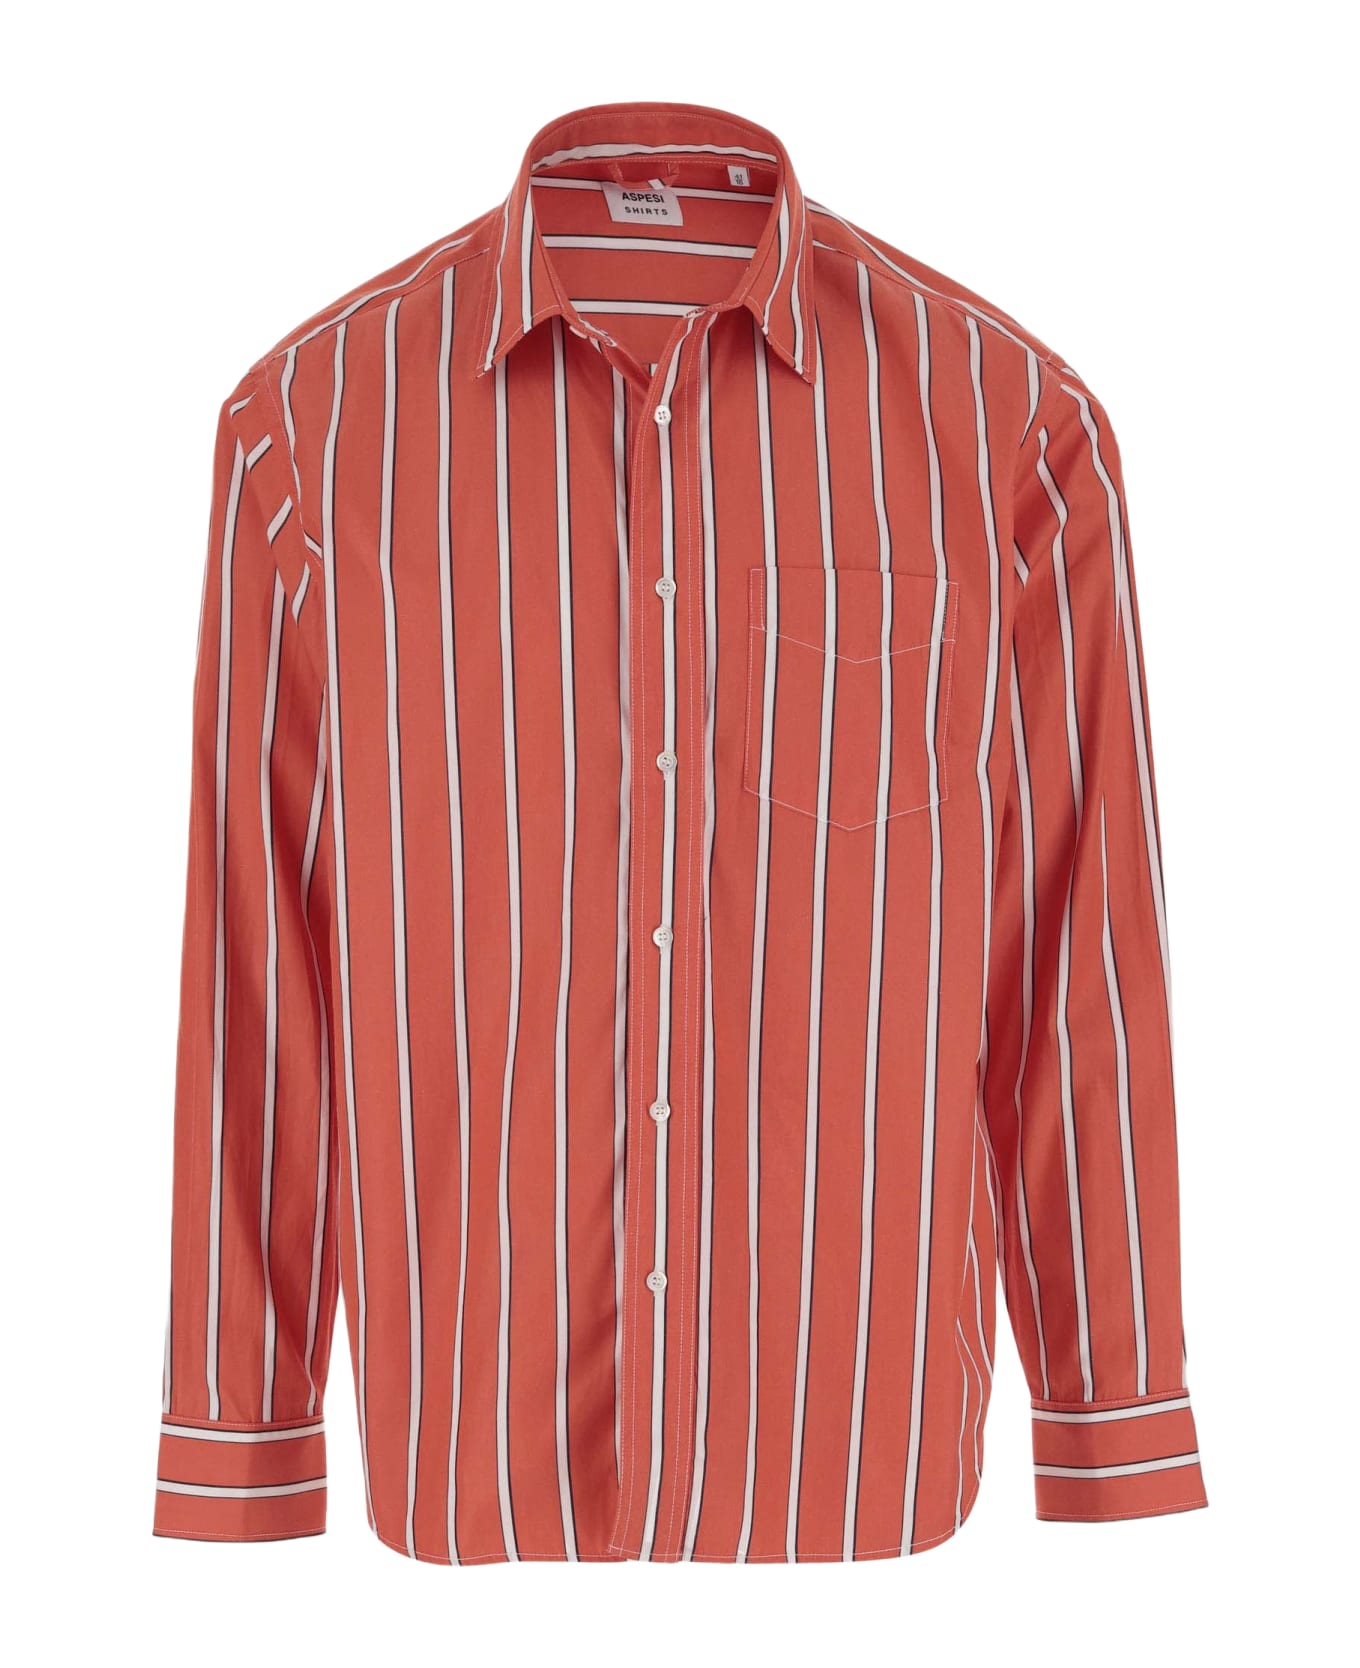 Aspesi Cotton Shirt With Striped Pattern - Red